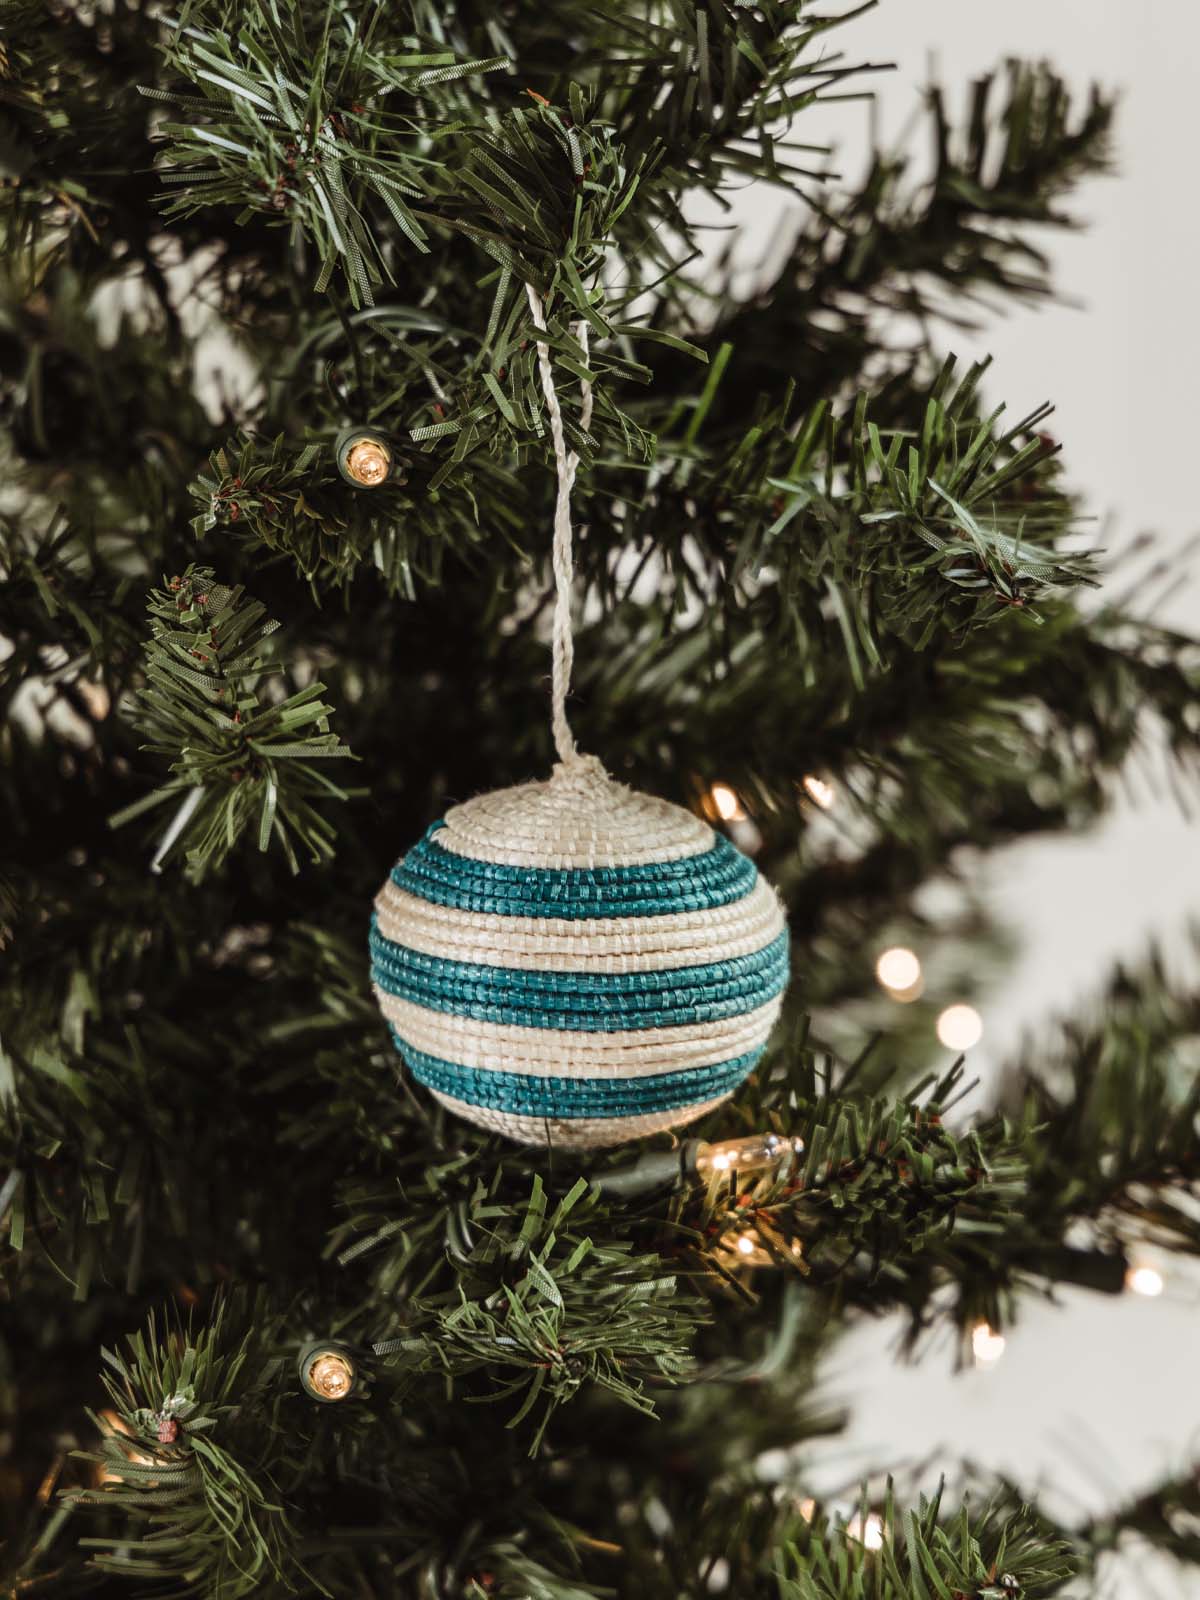 White and blue-green woven striped ball ornament hanging on holiday tree. 